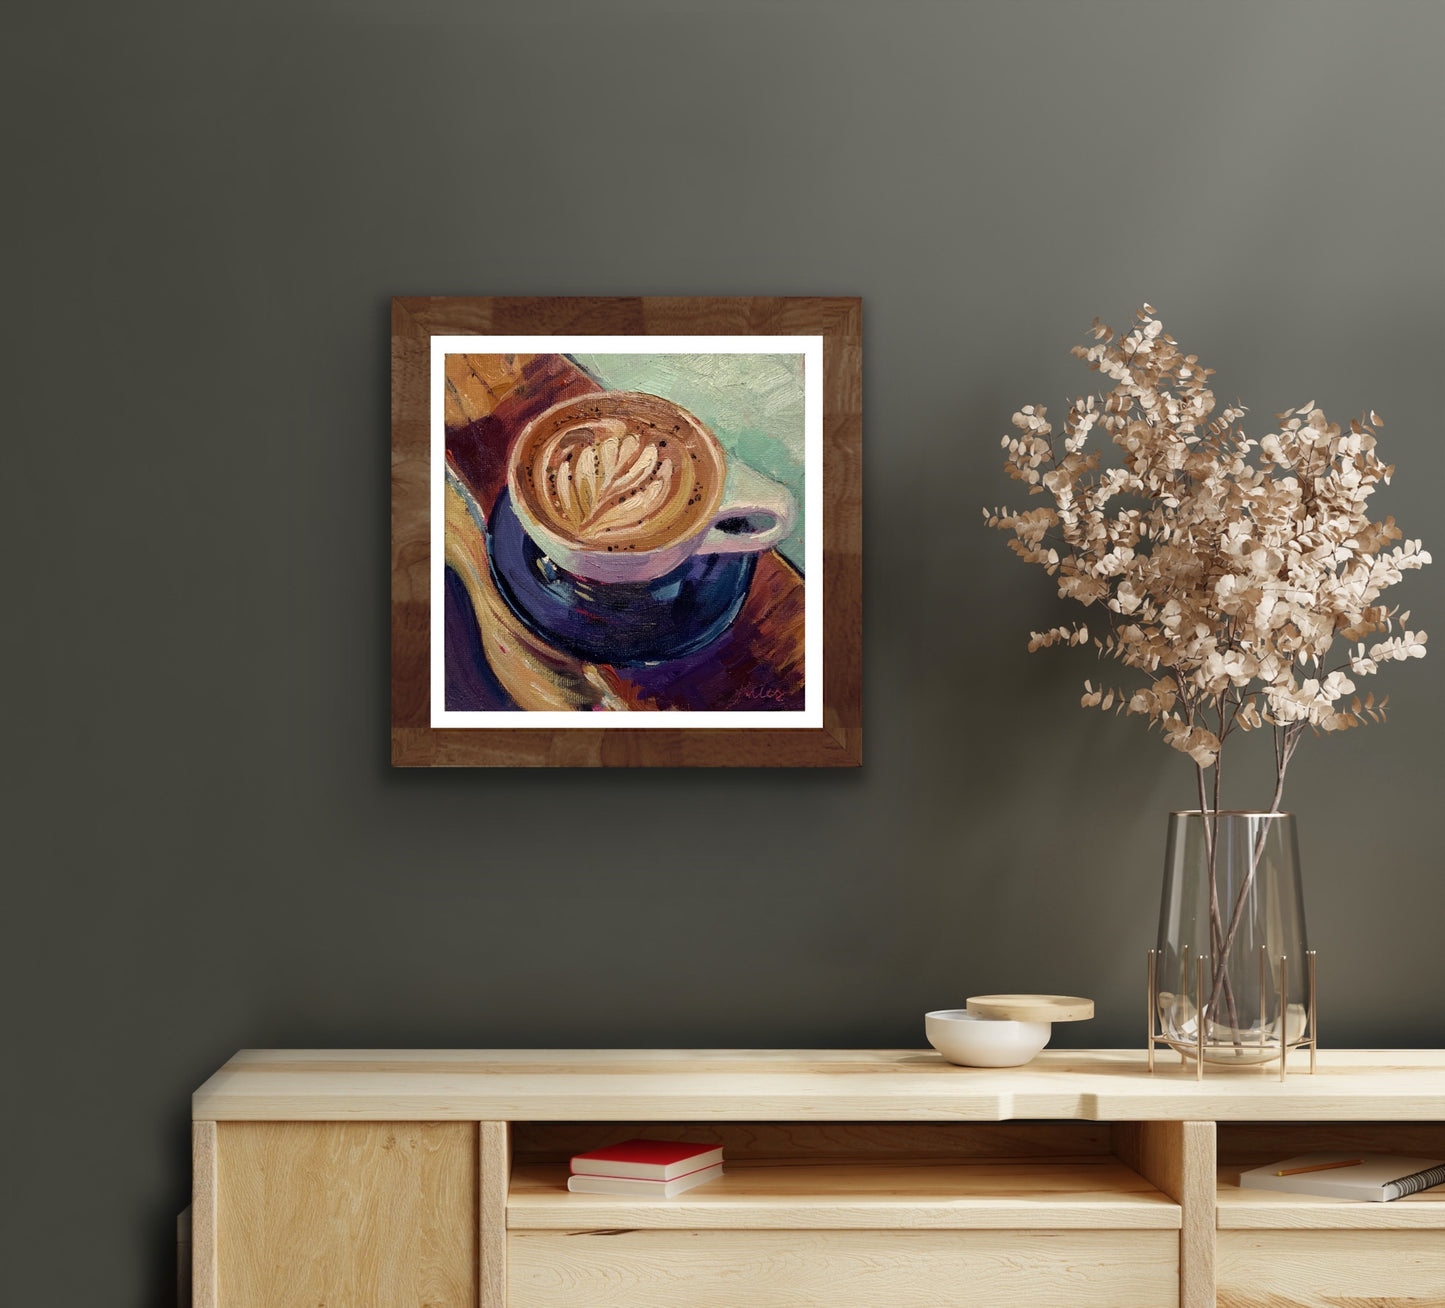 CUP OF KINDNESS -  Giclee Reproduction PRINT of Original Oil Painting